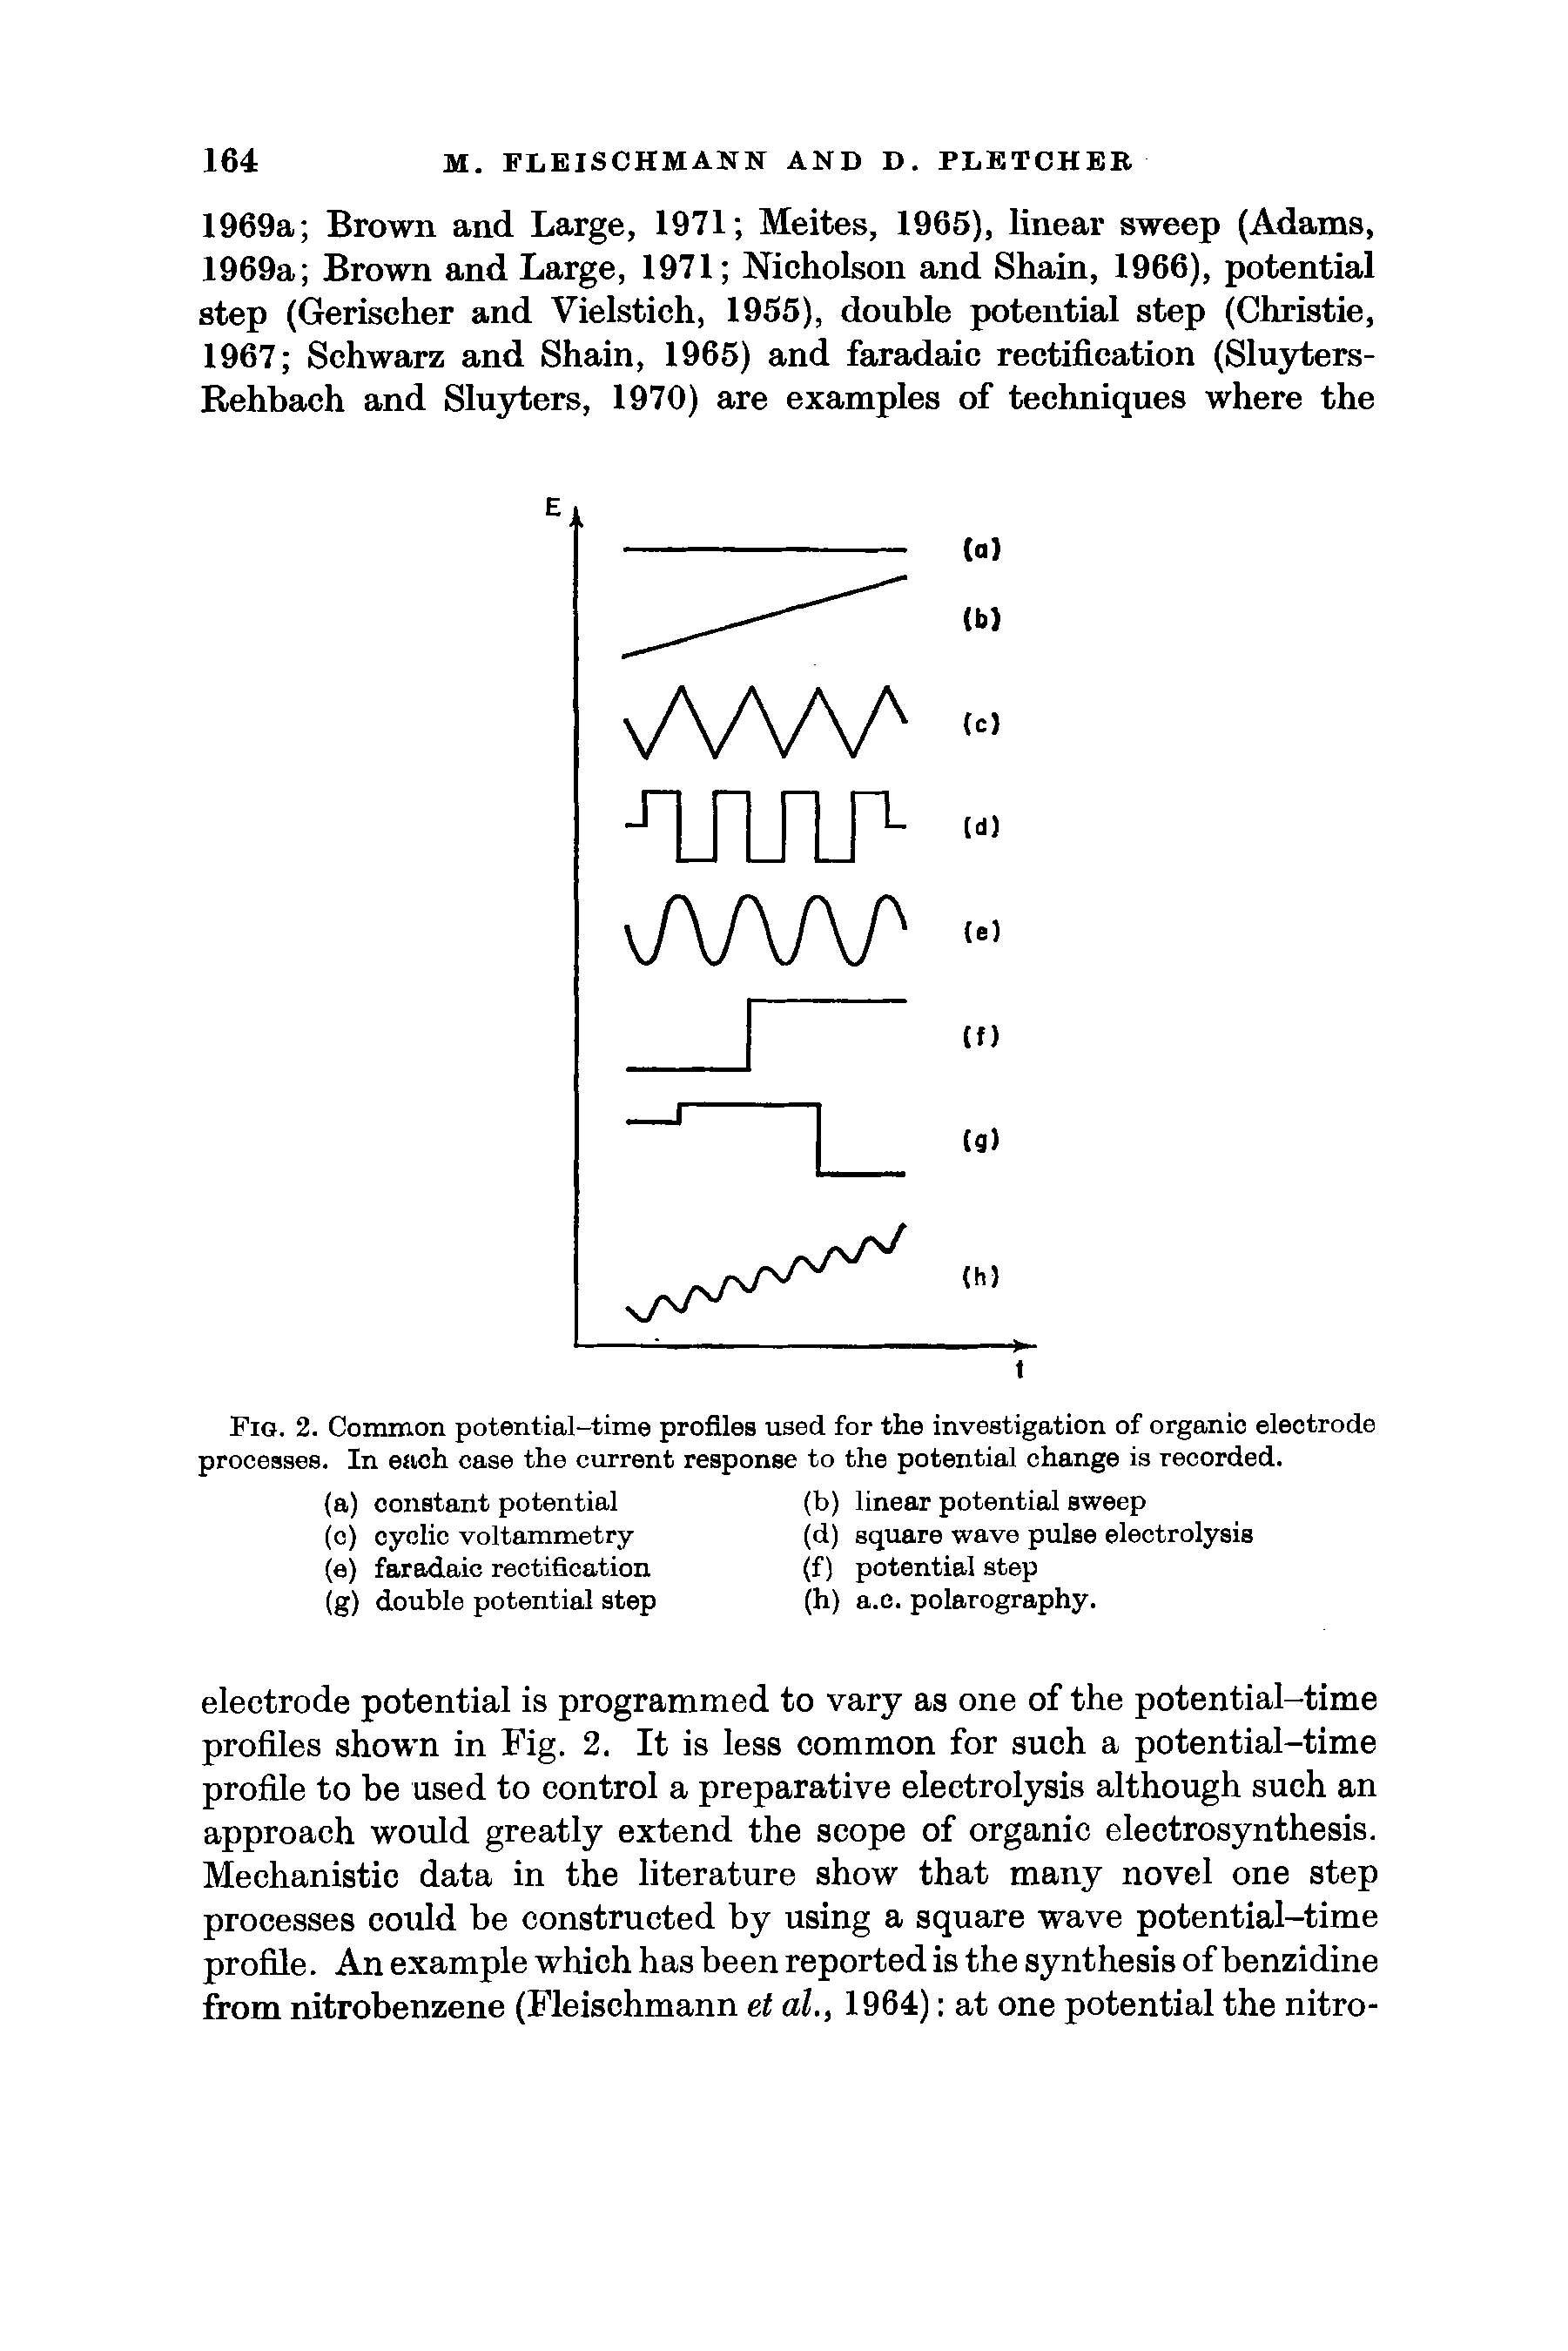 Fig. 2. Common potential-time profiles used for the investigation of organic electrode processes. In each case the current response to the potential change is recorded.